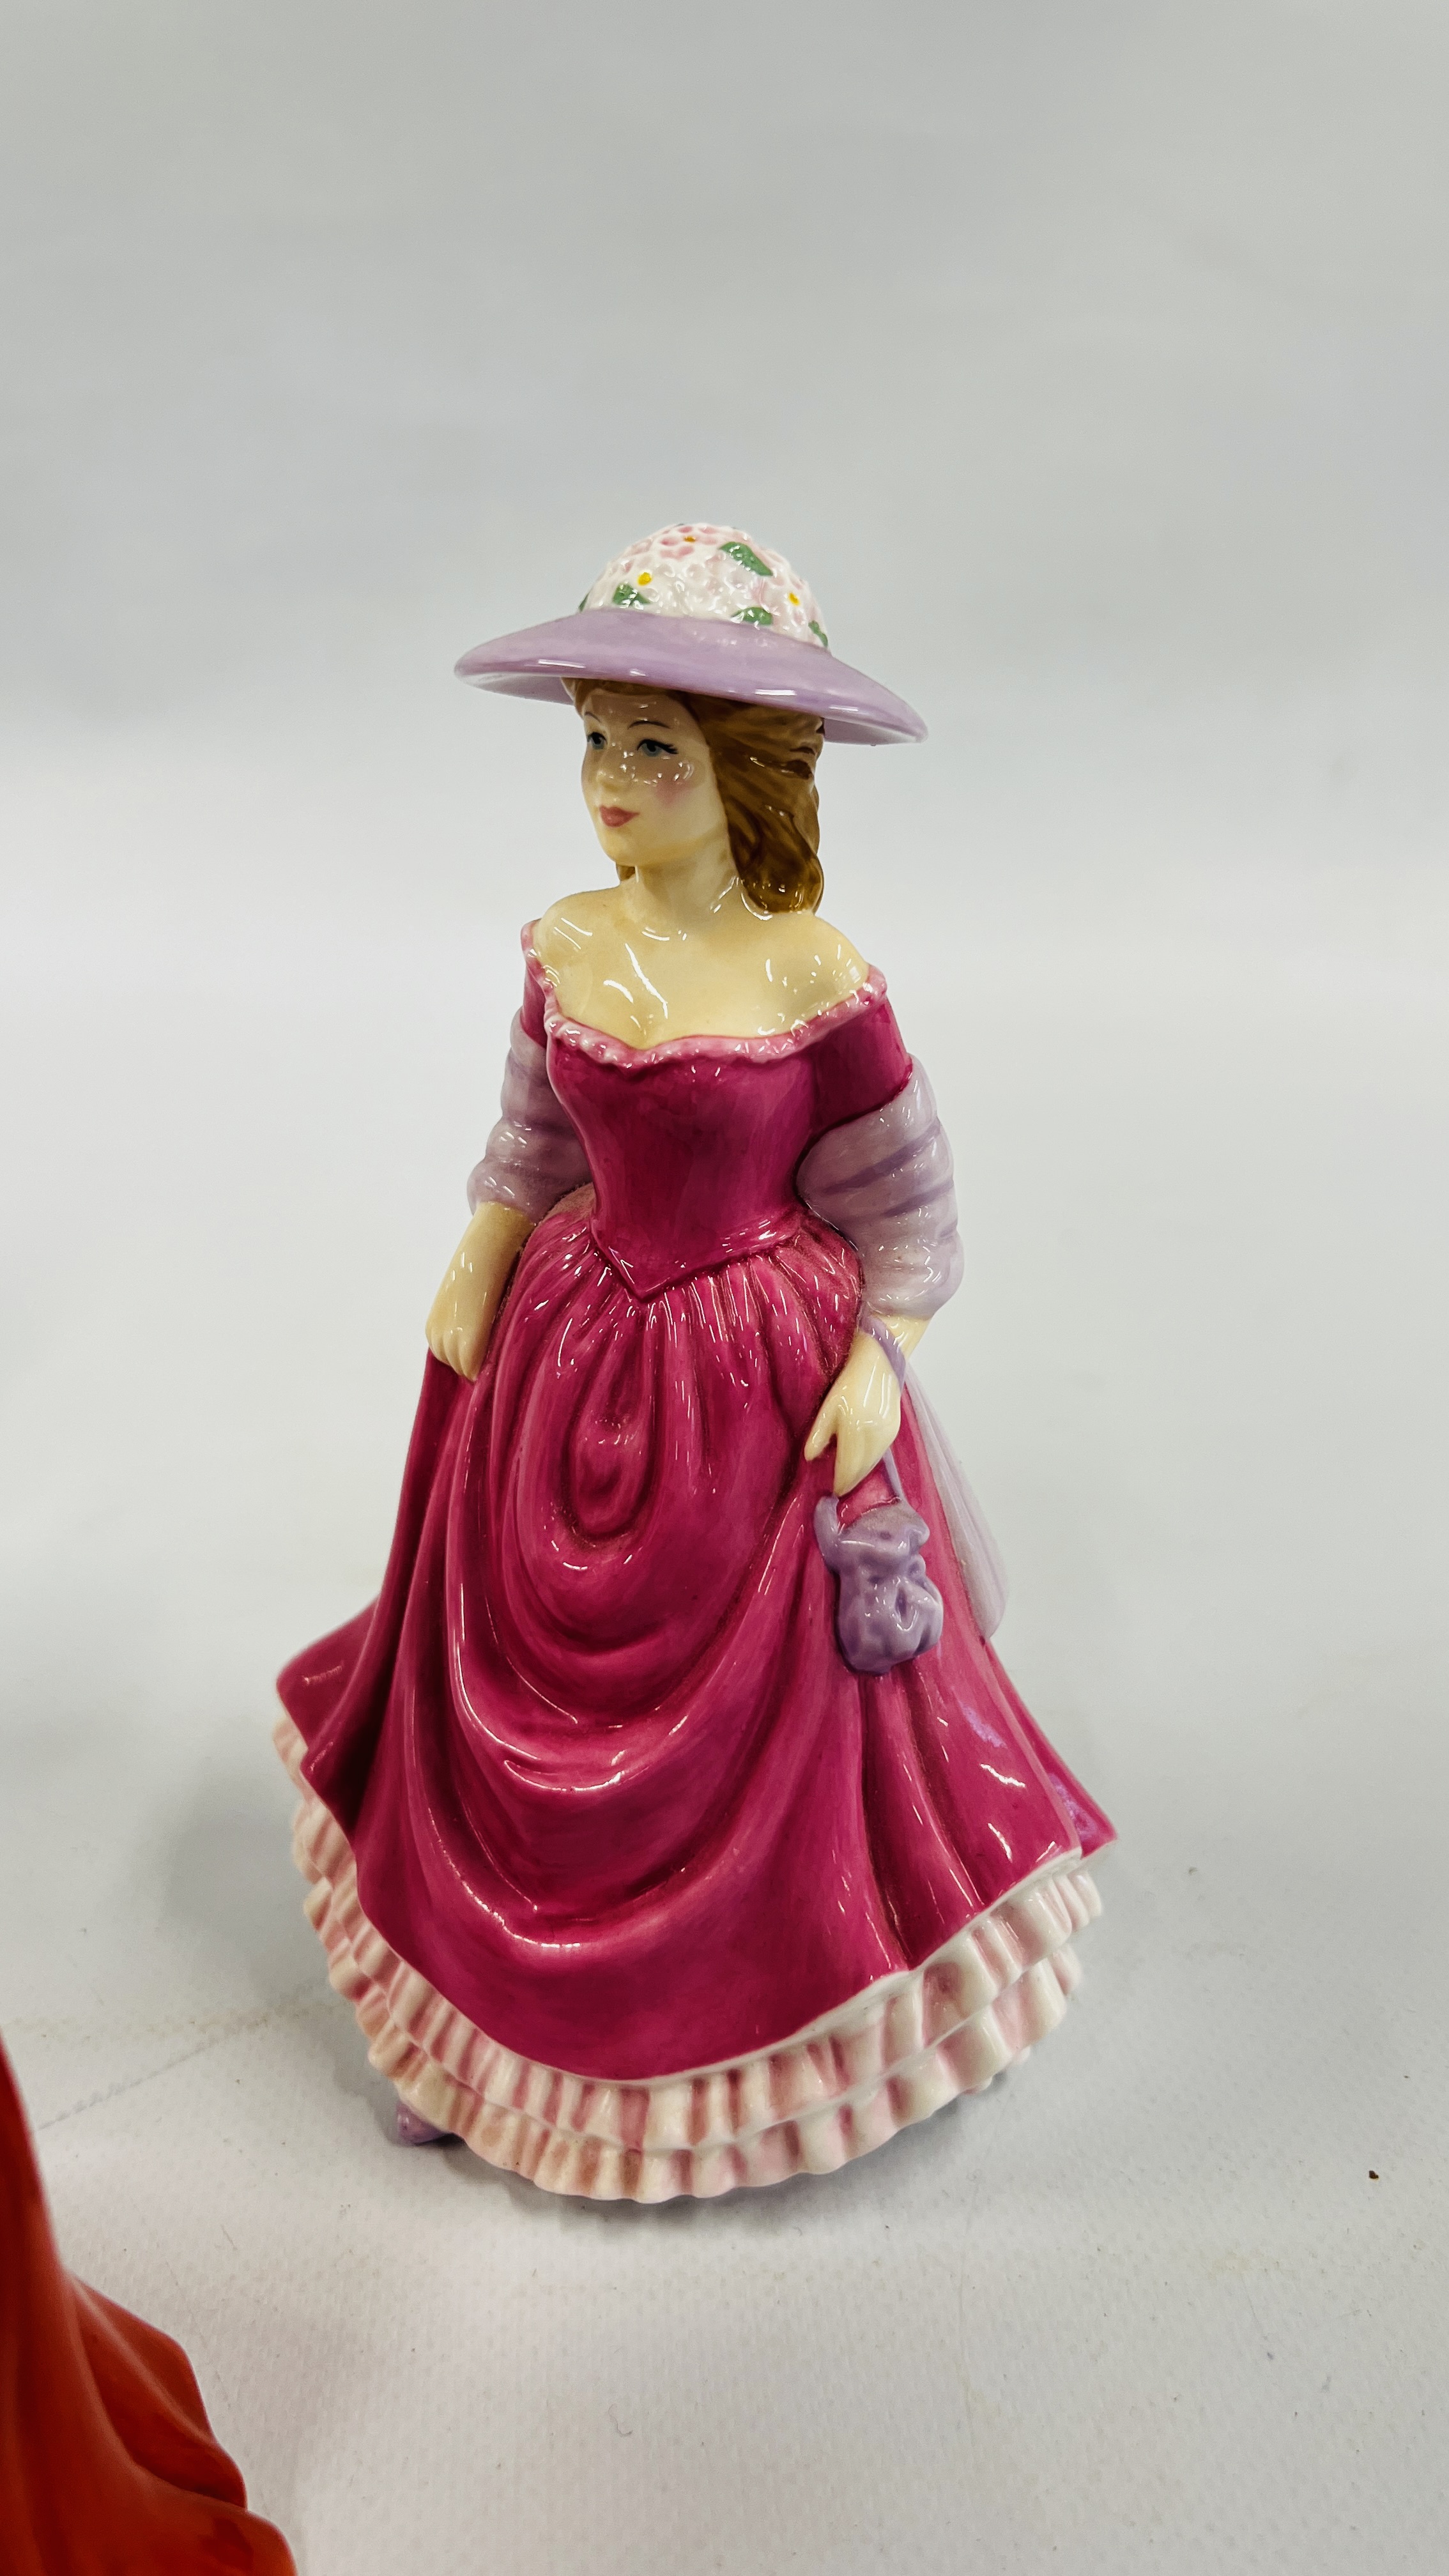 3 ROYAL DOULTON CABINET COLLECTORS FIGURES TO INCLUDE "SUMMER BREEZE" HN 4587, - Image 3 of 9